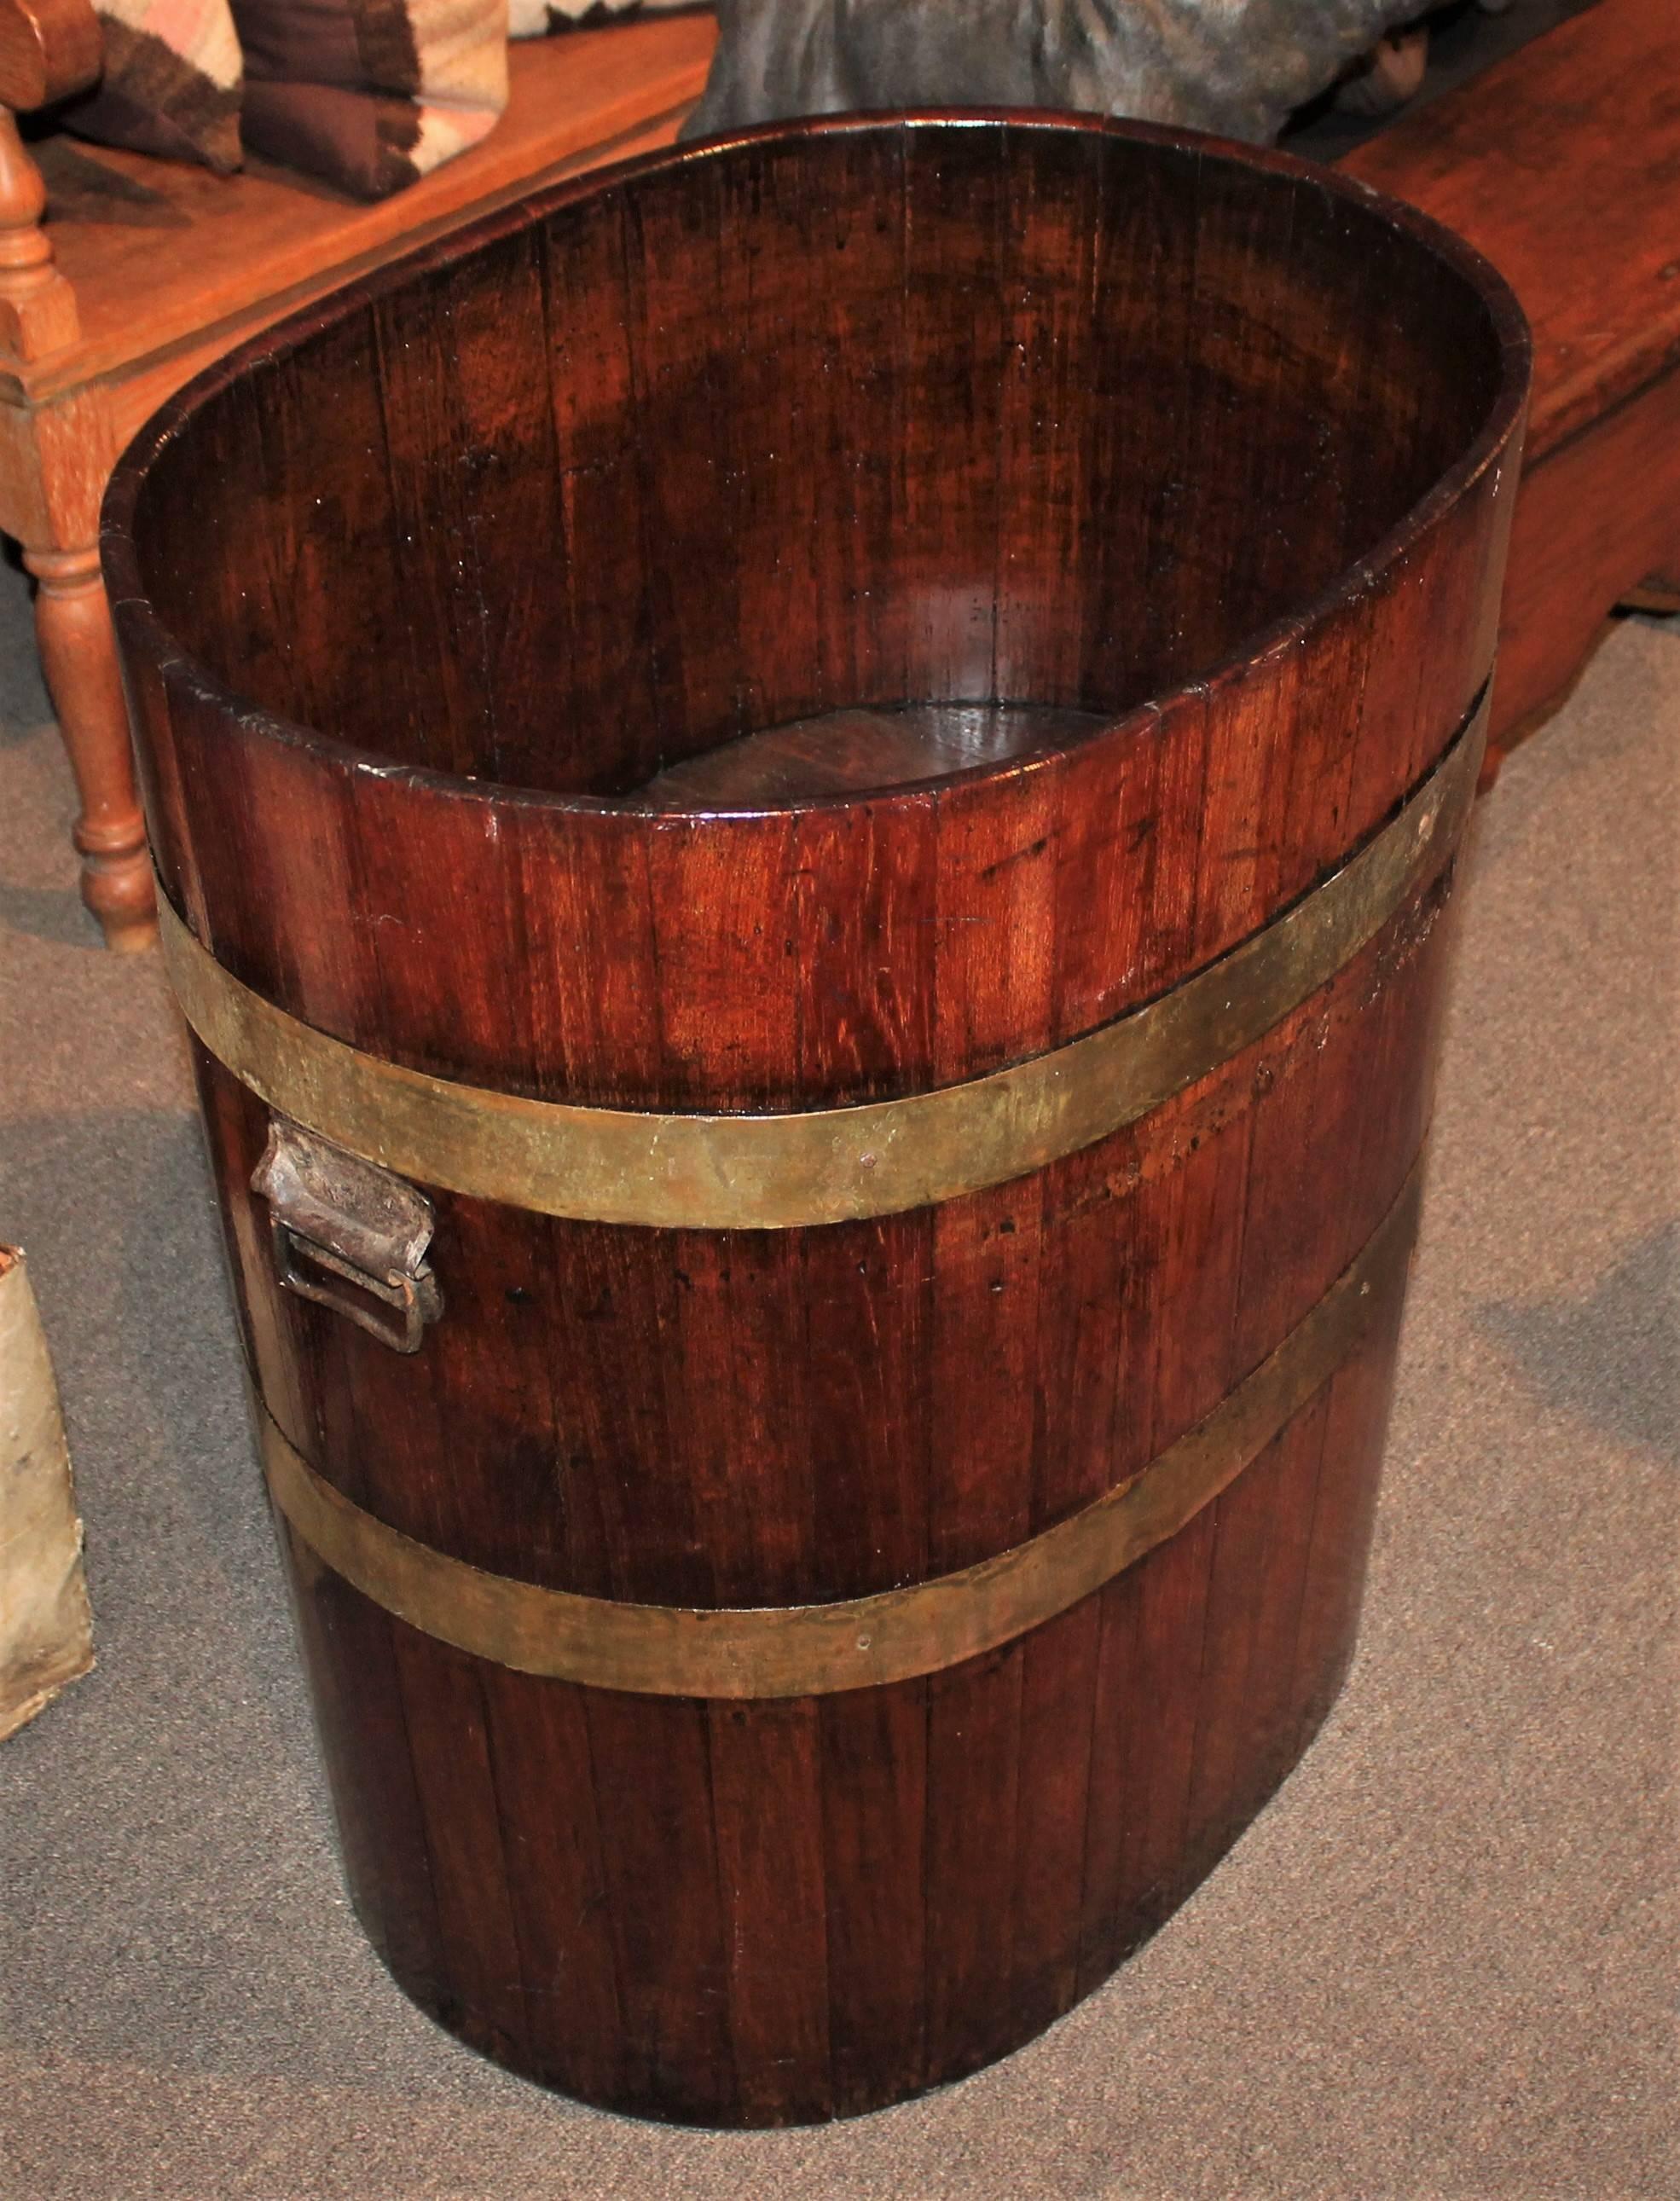 19th century barrel with original brass strapping's. This amazing barrel is in great condition and has been re-varnished for strength and stability. It had a light original varnish before hand. This also could have been used in a old general store.